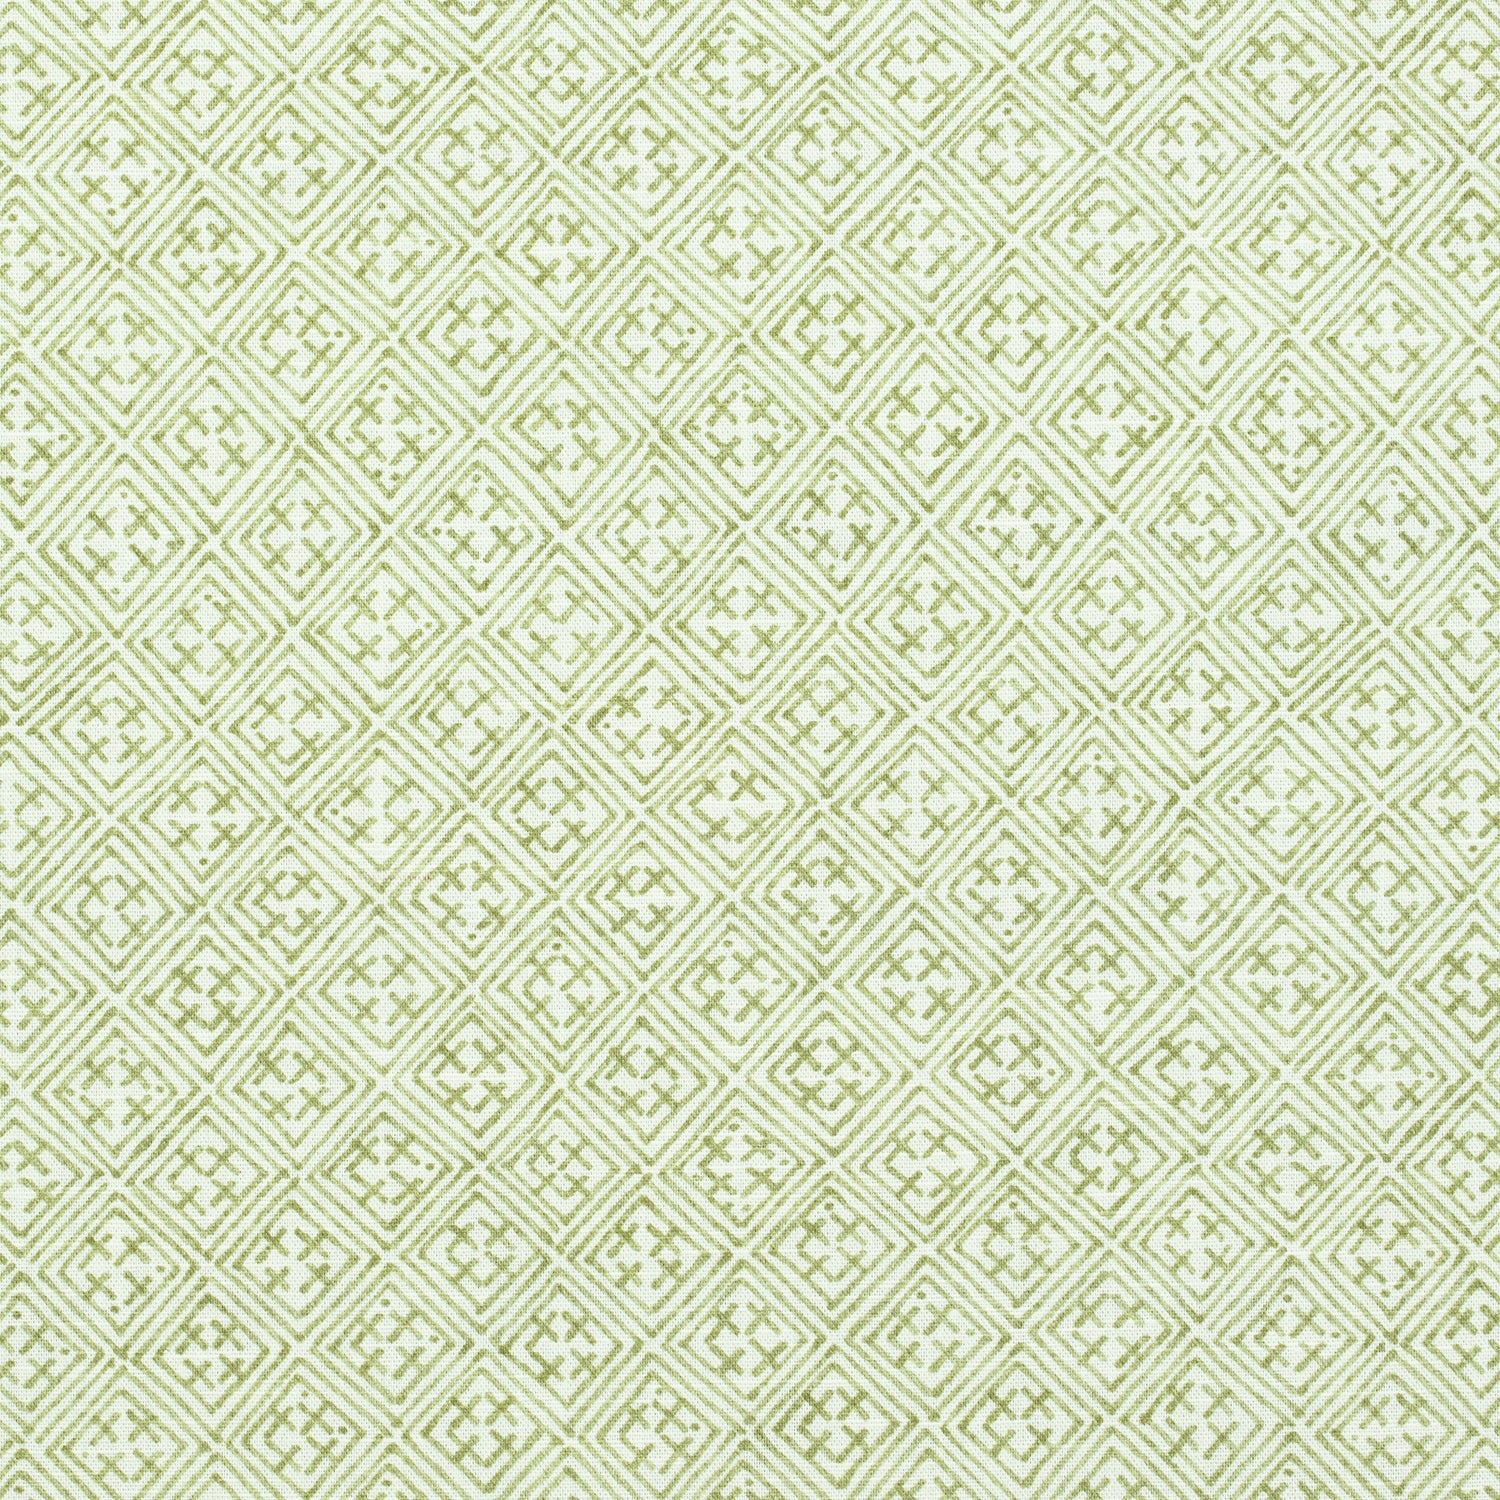 Laos fabric in spring green color - pattern number F972615 - by Thibaut in the Chestnut Hill collection